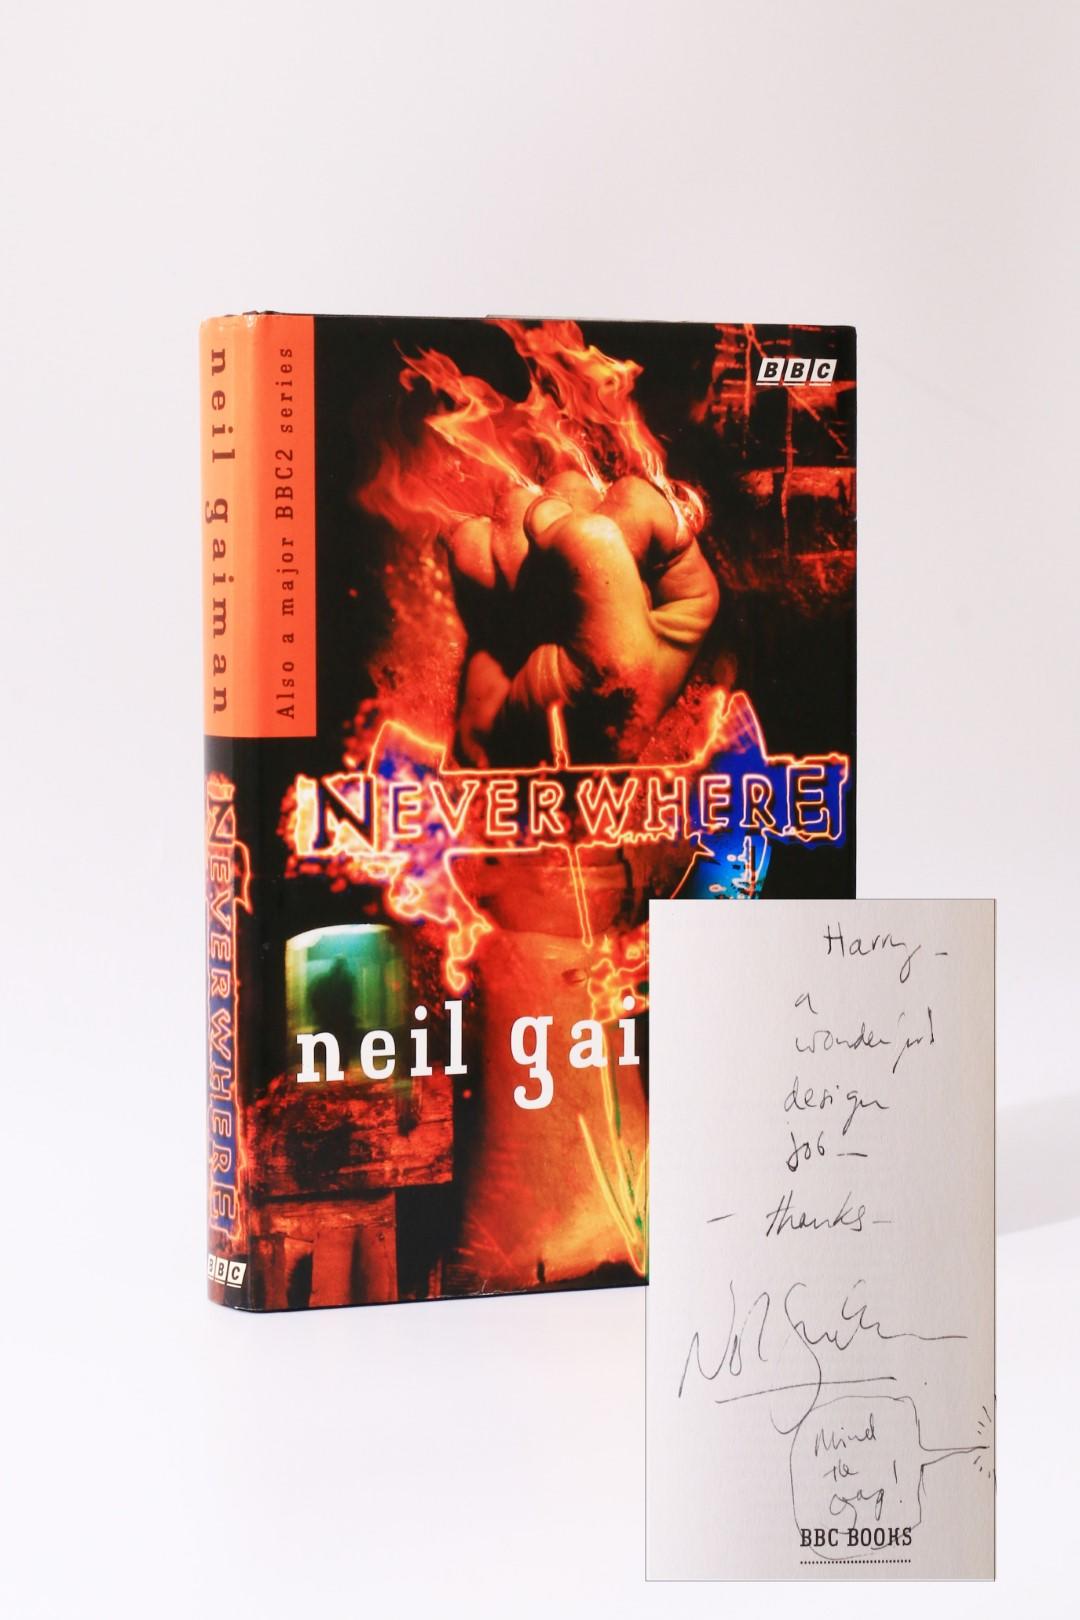 Neil Gaiman - Neverwhere - BBC, 1996, Signed Limited Edition.